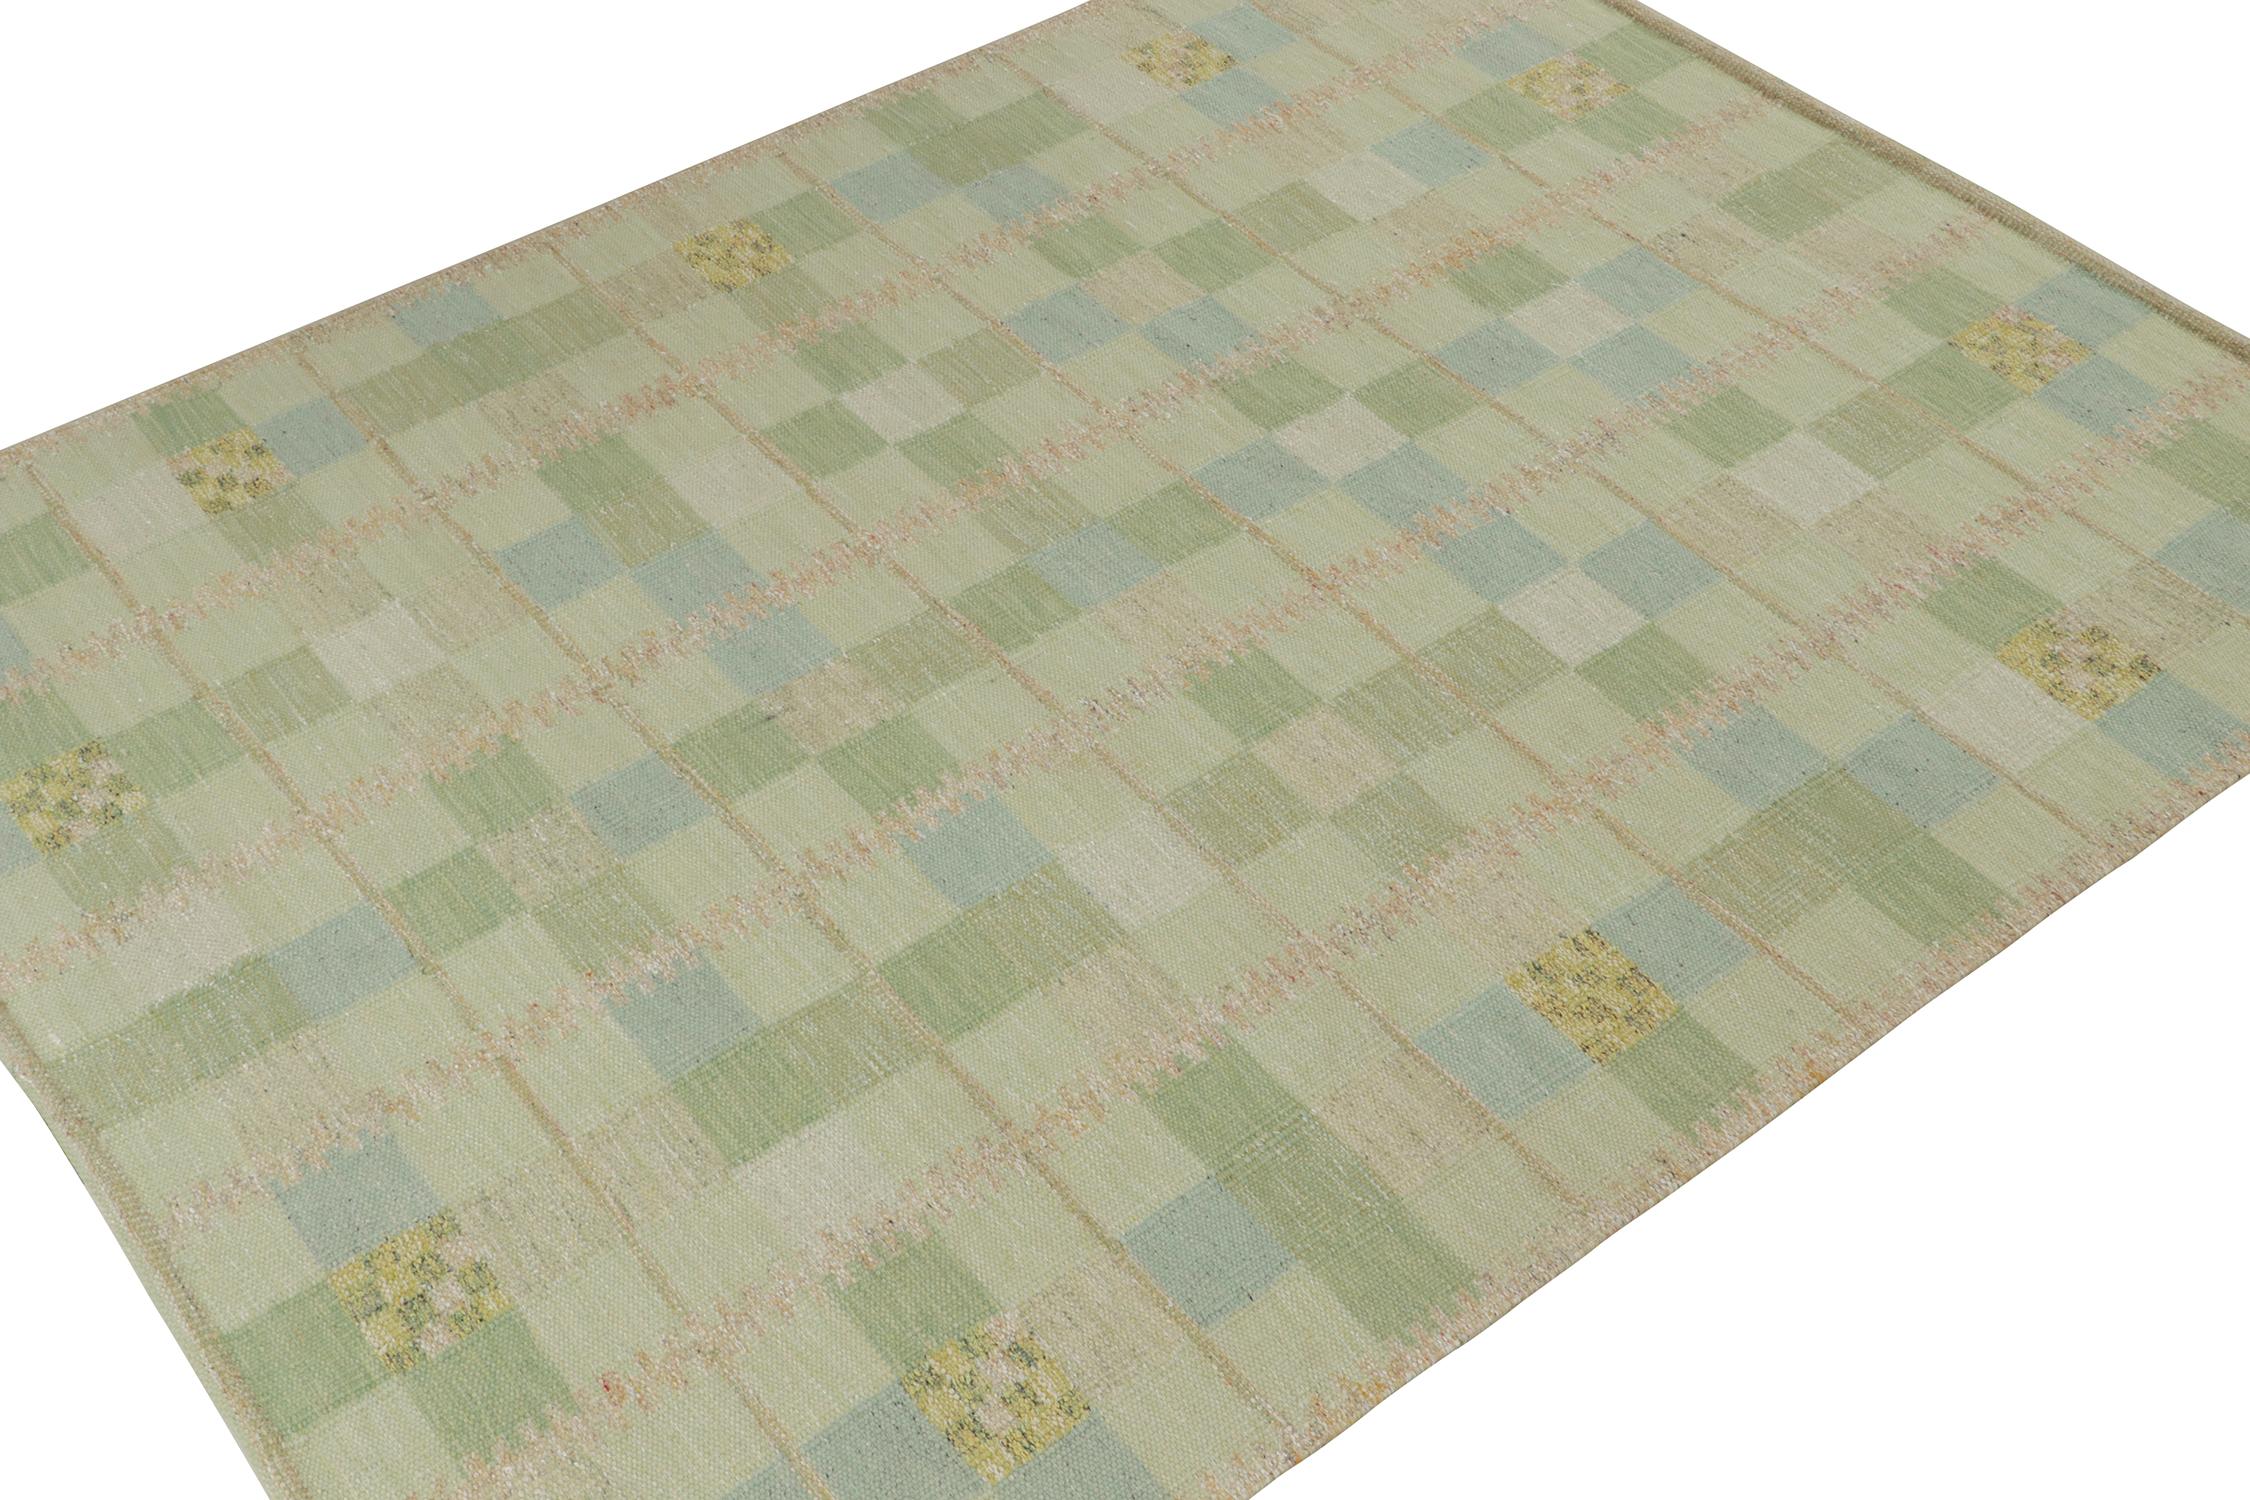 A Swedish style custom kilim design from Rug & Kilim's award-winning Scandinavian flat weave collection. Handwoven in wool. 
On the Design: 
This rug enjoys a pleasing and gentle movement with geometric patterns in the most refreshing green, blue,